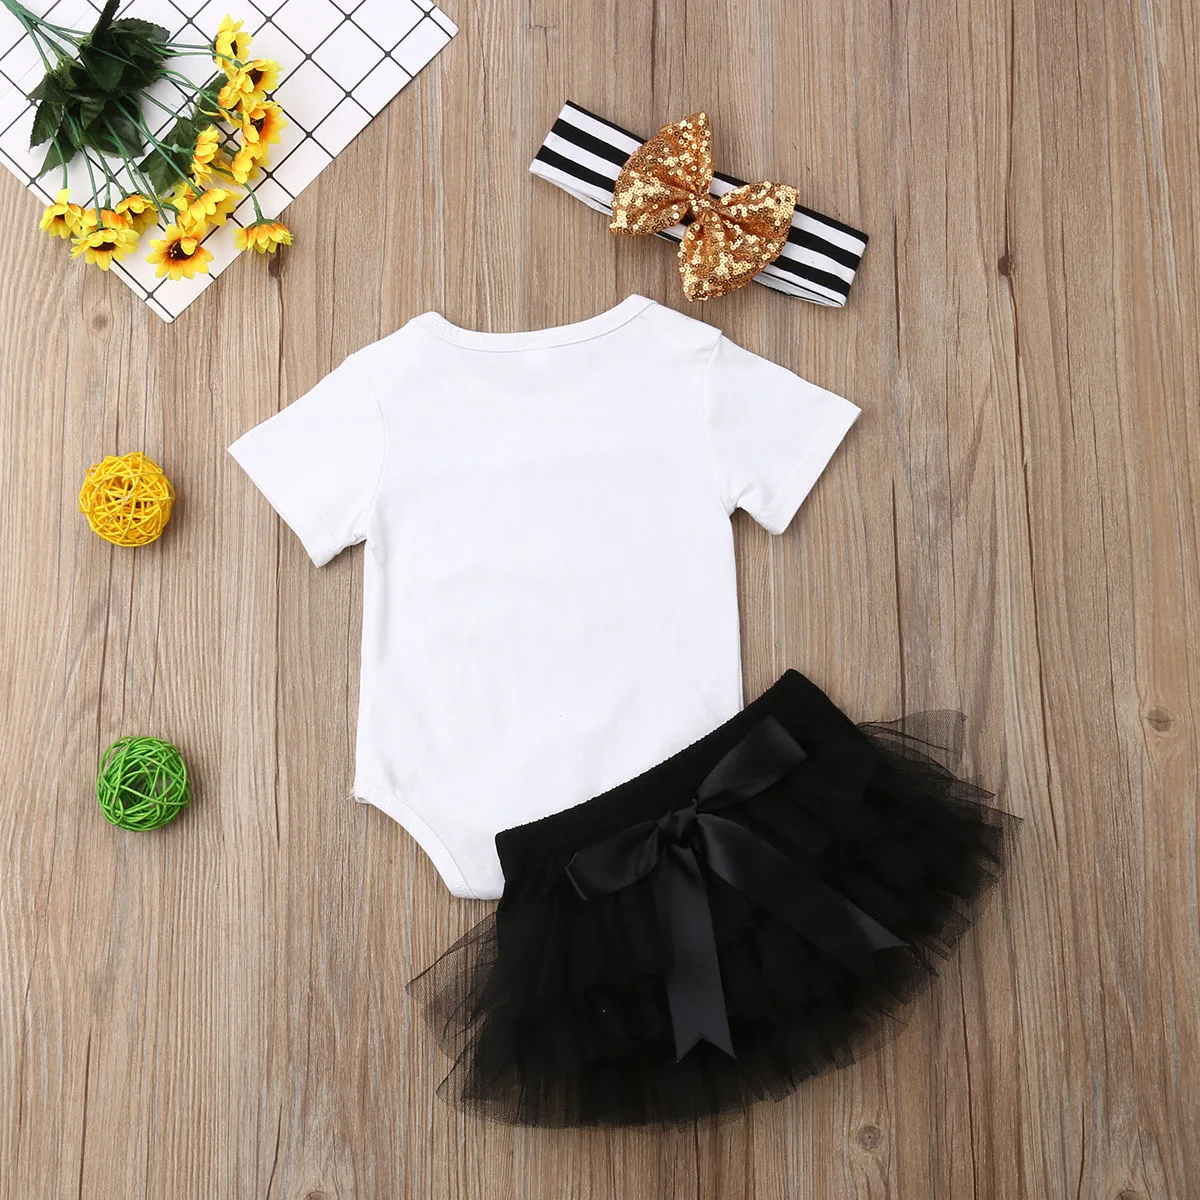 Newborn Infant Baby Girls Summer Short Sleeve Clothes Set Withe Letter Print Romper+Black Tutu Skirt+Headband 3pcs Casual Outfit